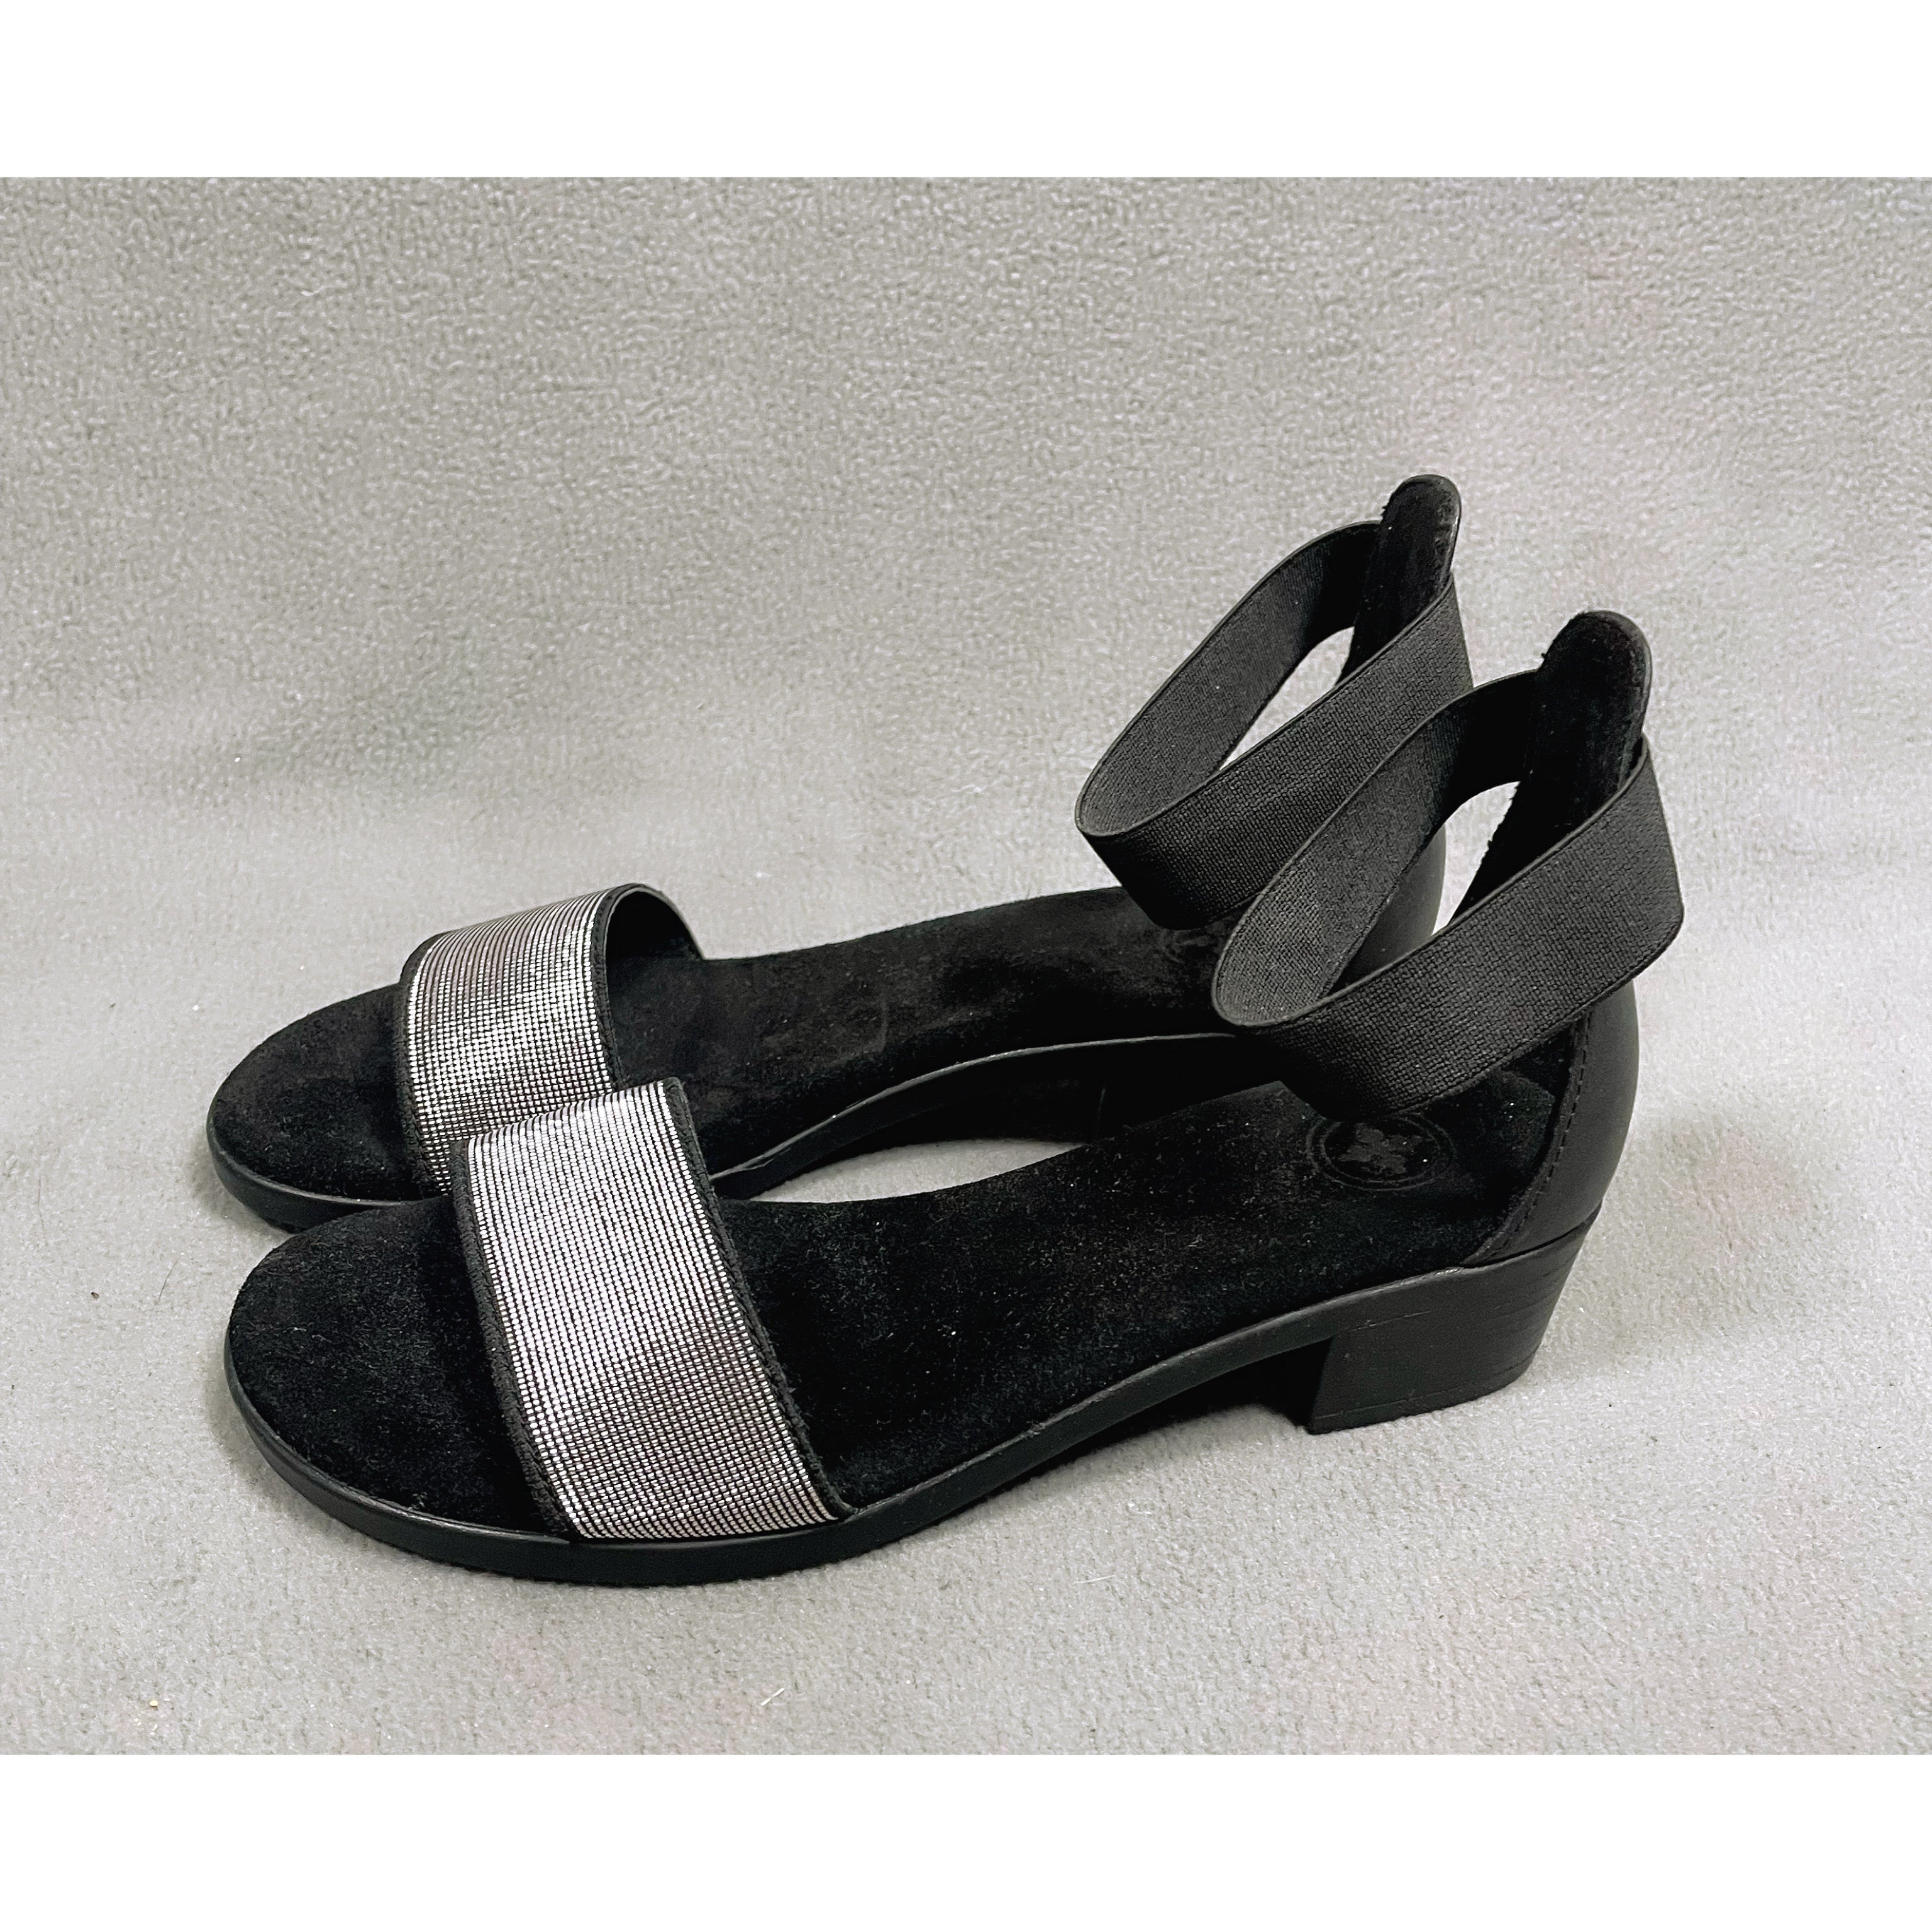 Charleston Shoe Co. black and silver Marlin sandal, size 6, BRAND NEW!